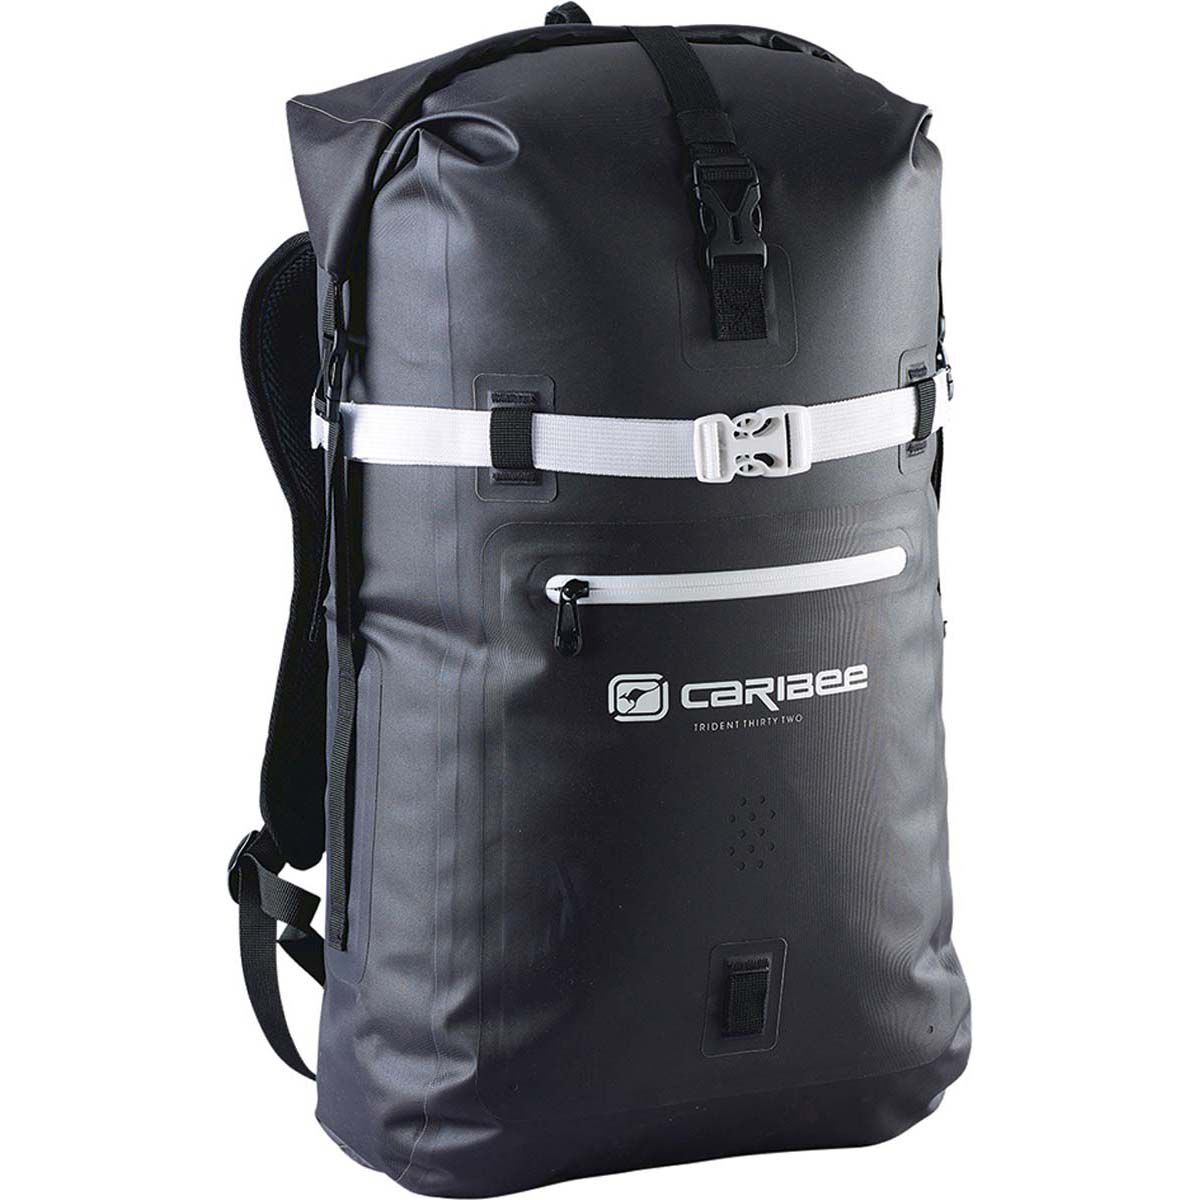 Caribee Cisco Backpack - The Outdoor Guide